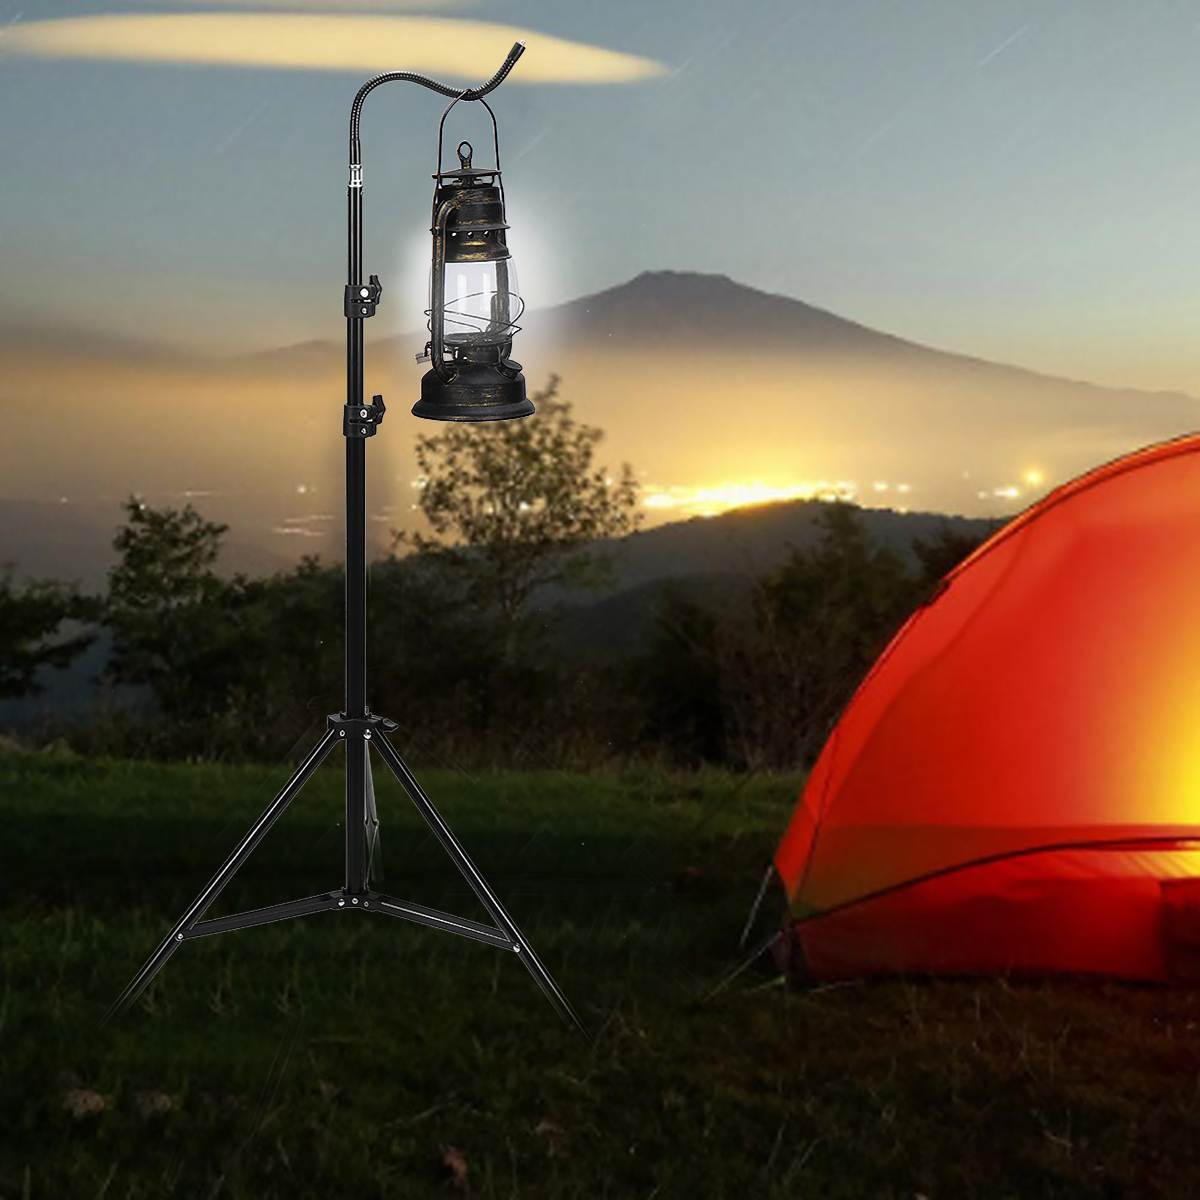 21m-Foldable-Lamp-Holder-Camping-Outdoor-Portable-Tent-Table-Hanger-Hook-Light-Fix-Stand-Camping-Lig-1935366-9